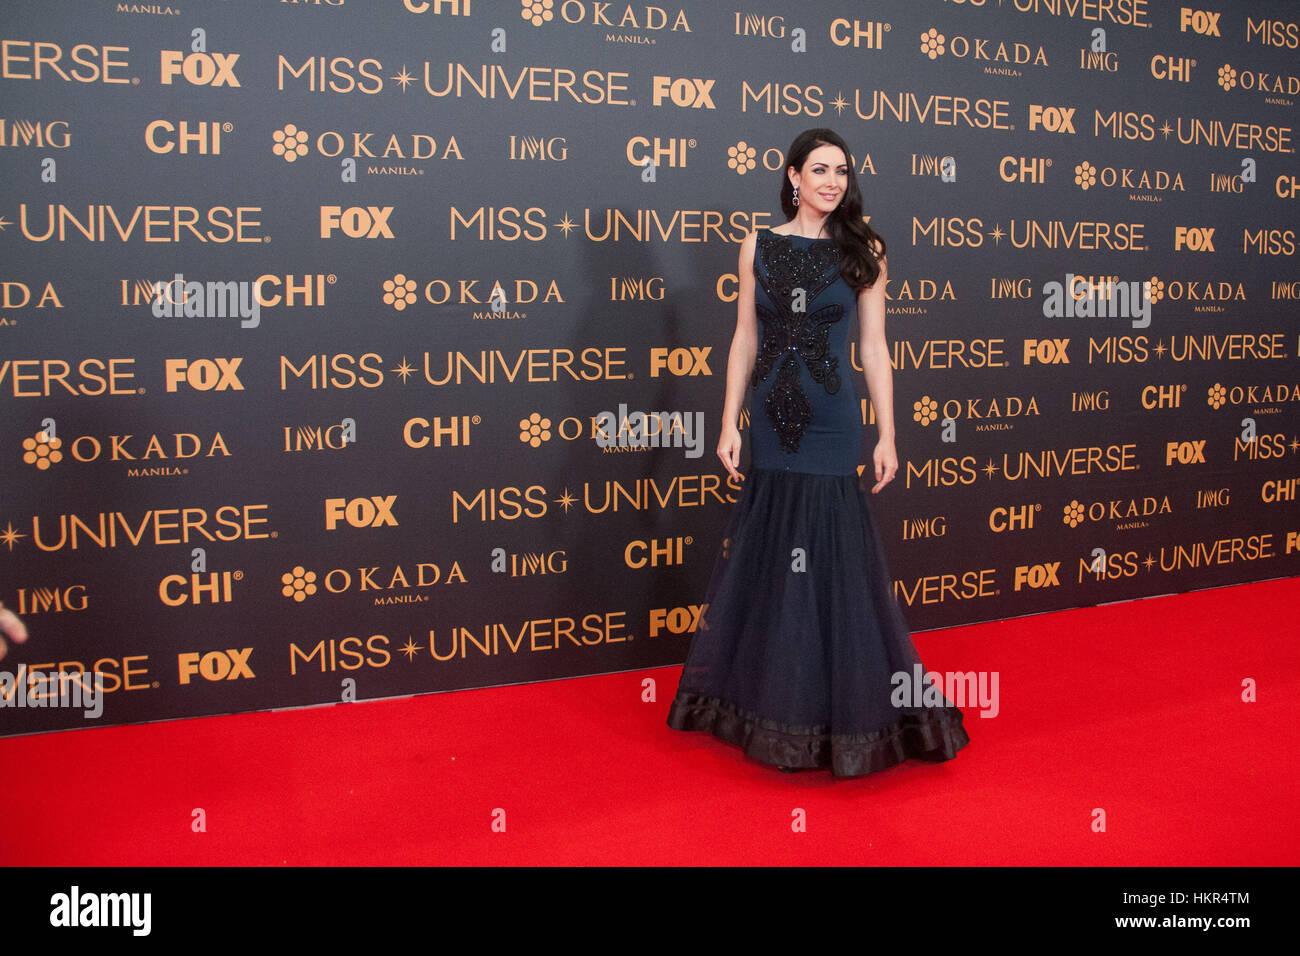 Pasay City, Philippines. 29th Jan, 2017. Miss Universe 2005 Natalie Glebova on the red carpet at the SMX in Pasay City. Miss Universe VIP's walked the red carpet at the SMX in Pasay City a day before the coronation. Credit: J Gerard Seguia/Pacific Press/Alamy Live News Stock Photo